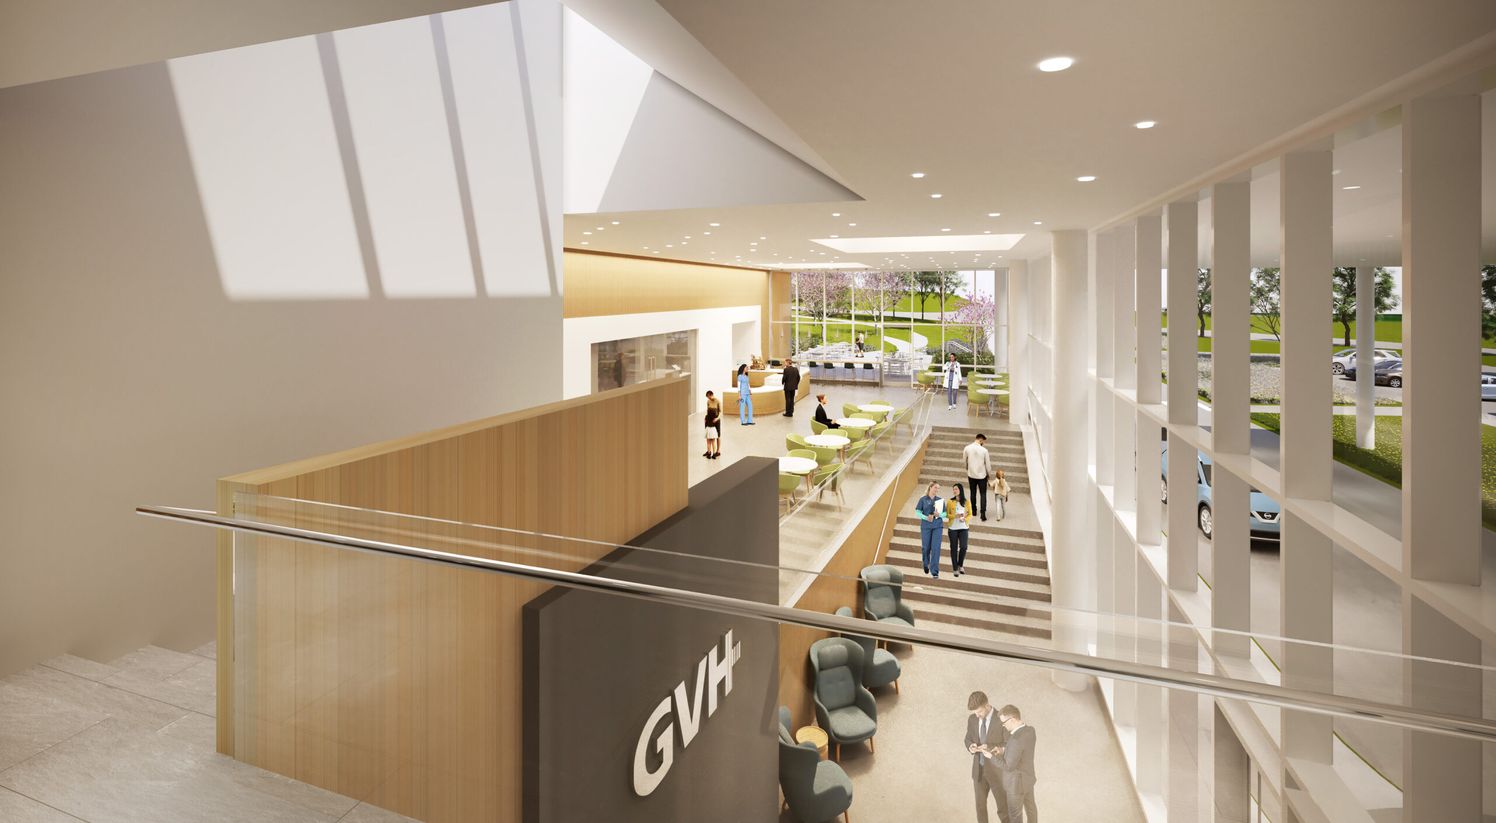 Architectural rendering of the lobby of Grand View Health